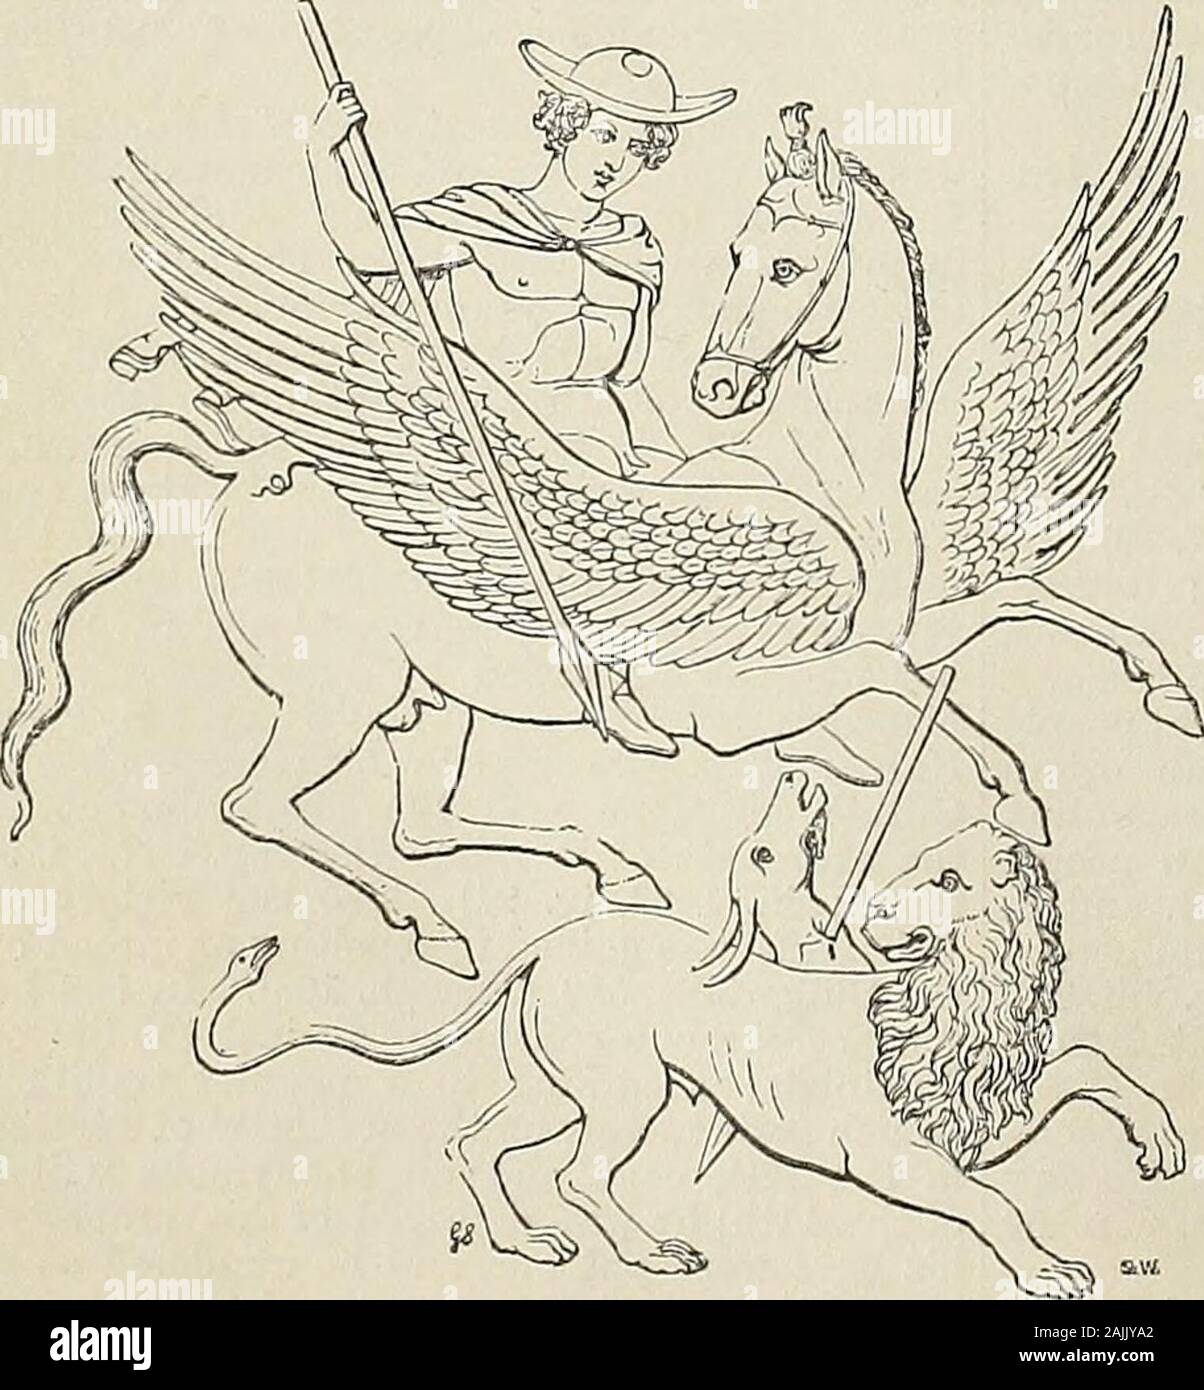 www.flickr.com/photos/internetarchivebookimages/tags/book... . Bellerophon taking leave of Proetus. (Hamilton vases.) bravest Lycians, whom Iobates had placed inambush for the purpose, Bellerophon slew themall. Iobates, now seeing that it was hopelessto kill the hero, gave him his daughter(Philonoe, Anticlea, or Cassandra) in marriage,and made him his successor on the throne. father-in-law, Iobates, king of Lycia, withletter begging that the messenger should be. Bellerophon, Pegasus, and Chimaera. (Hamilton vases.) put to death. Iobates accordingly sent him tokill the monster Chimaera, thinkin Stock Photo